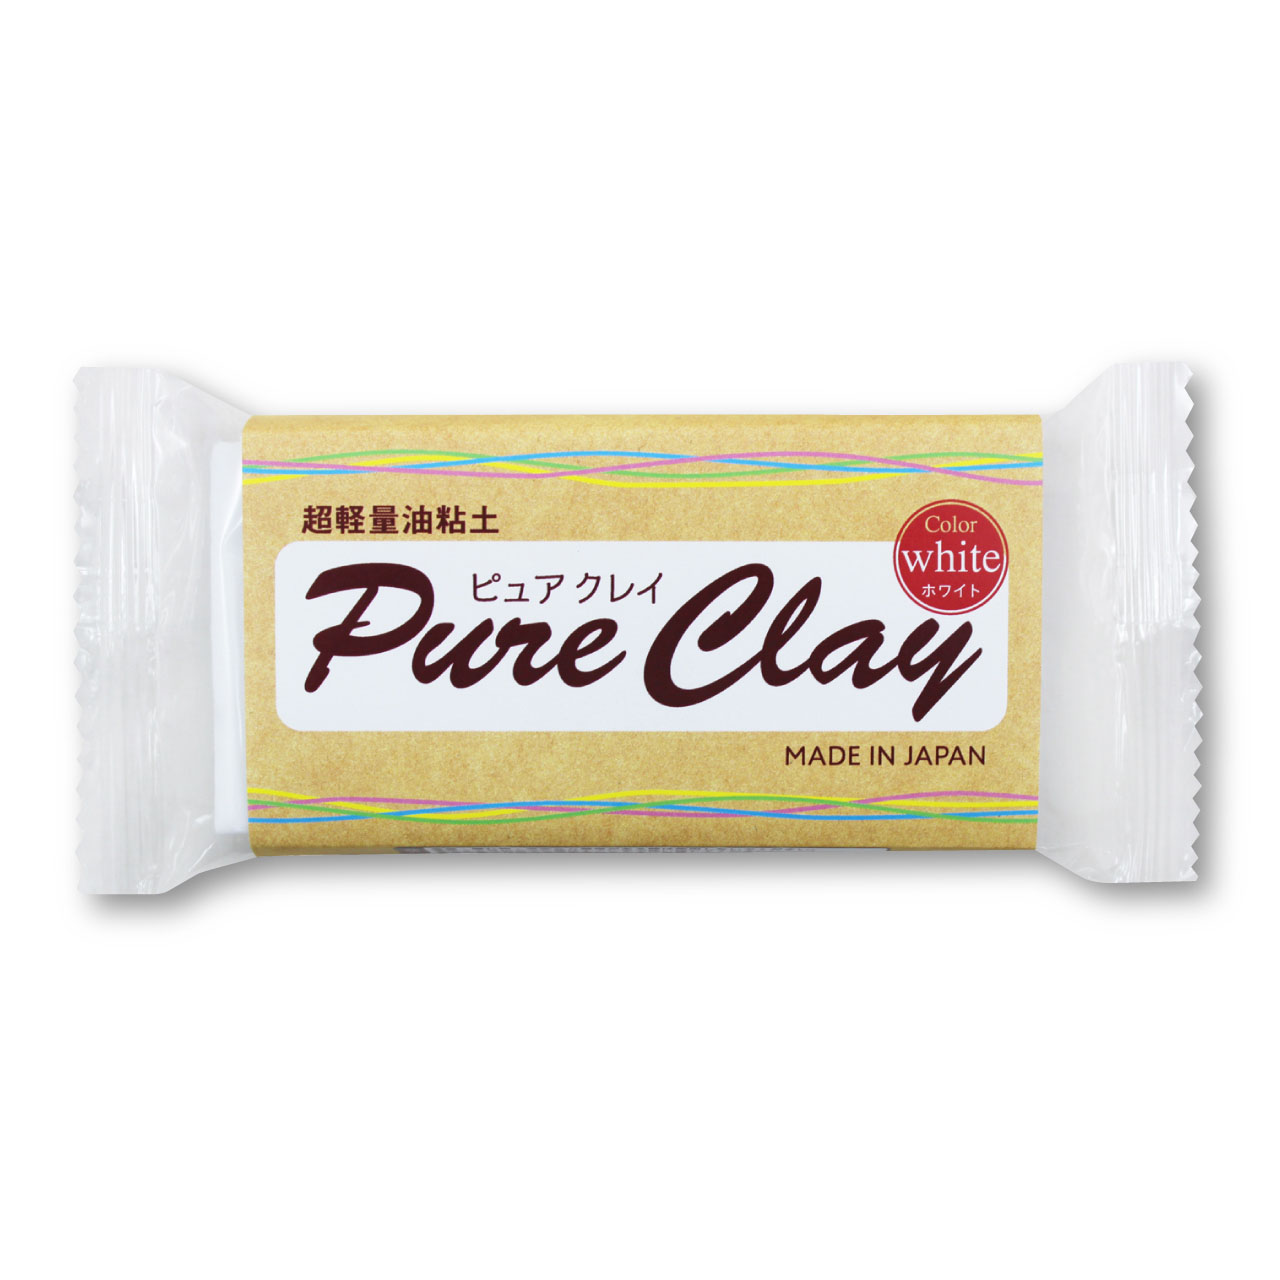 NKZ0863 Super lightweight oil-based clay ”Pure Clay” White 150g (pcs)